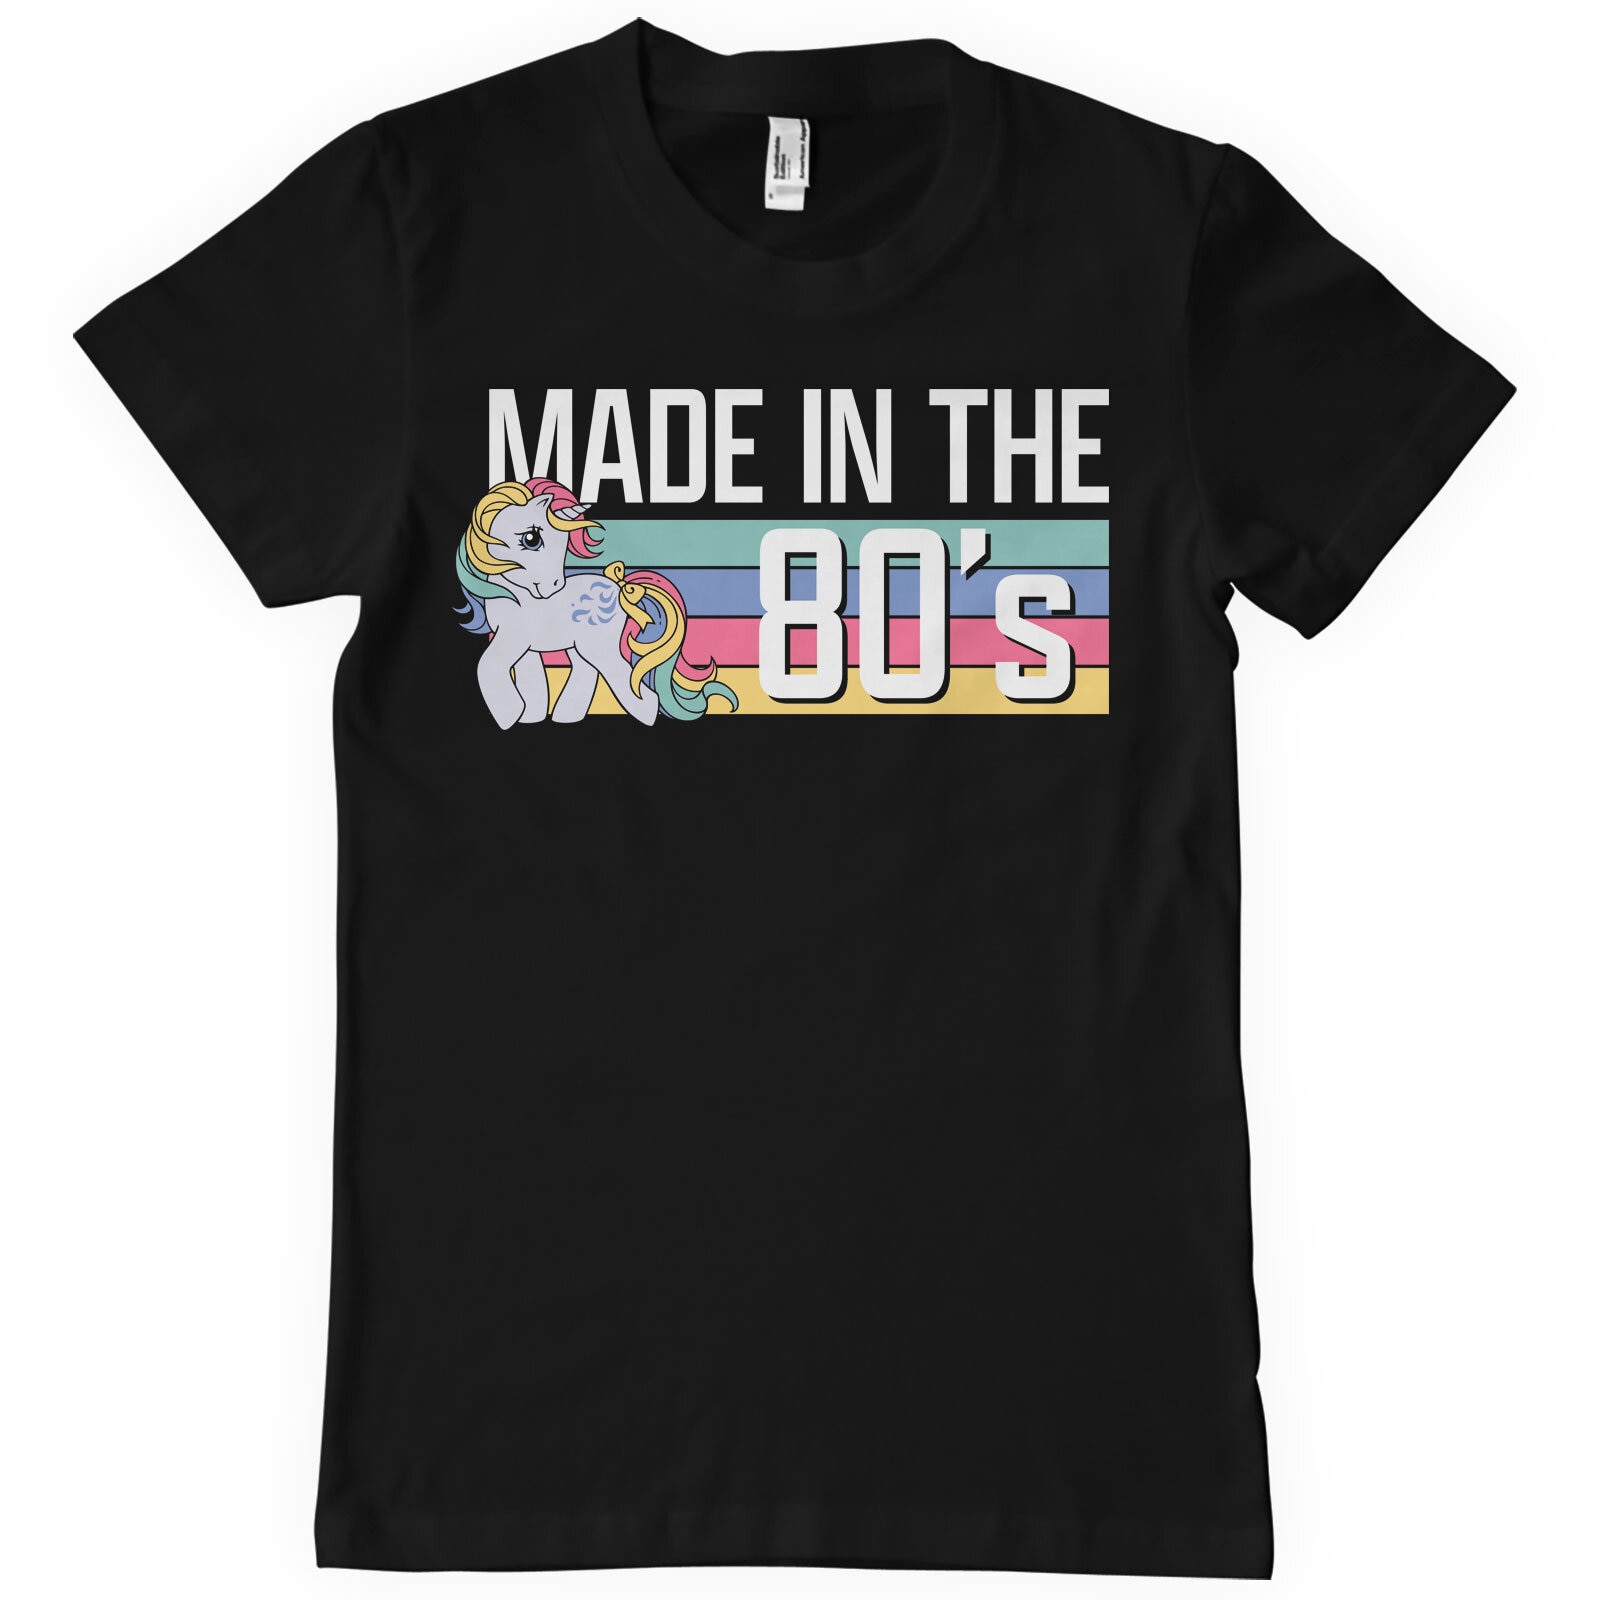 My Little Pony - Made In The 80's T-Shirt